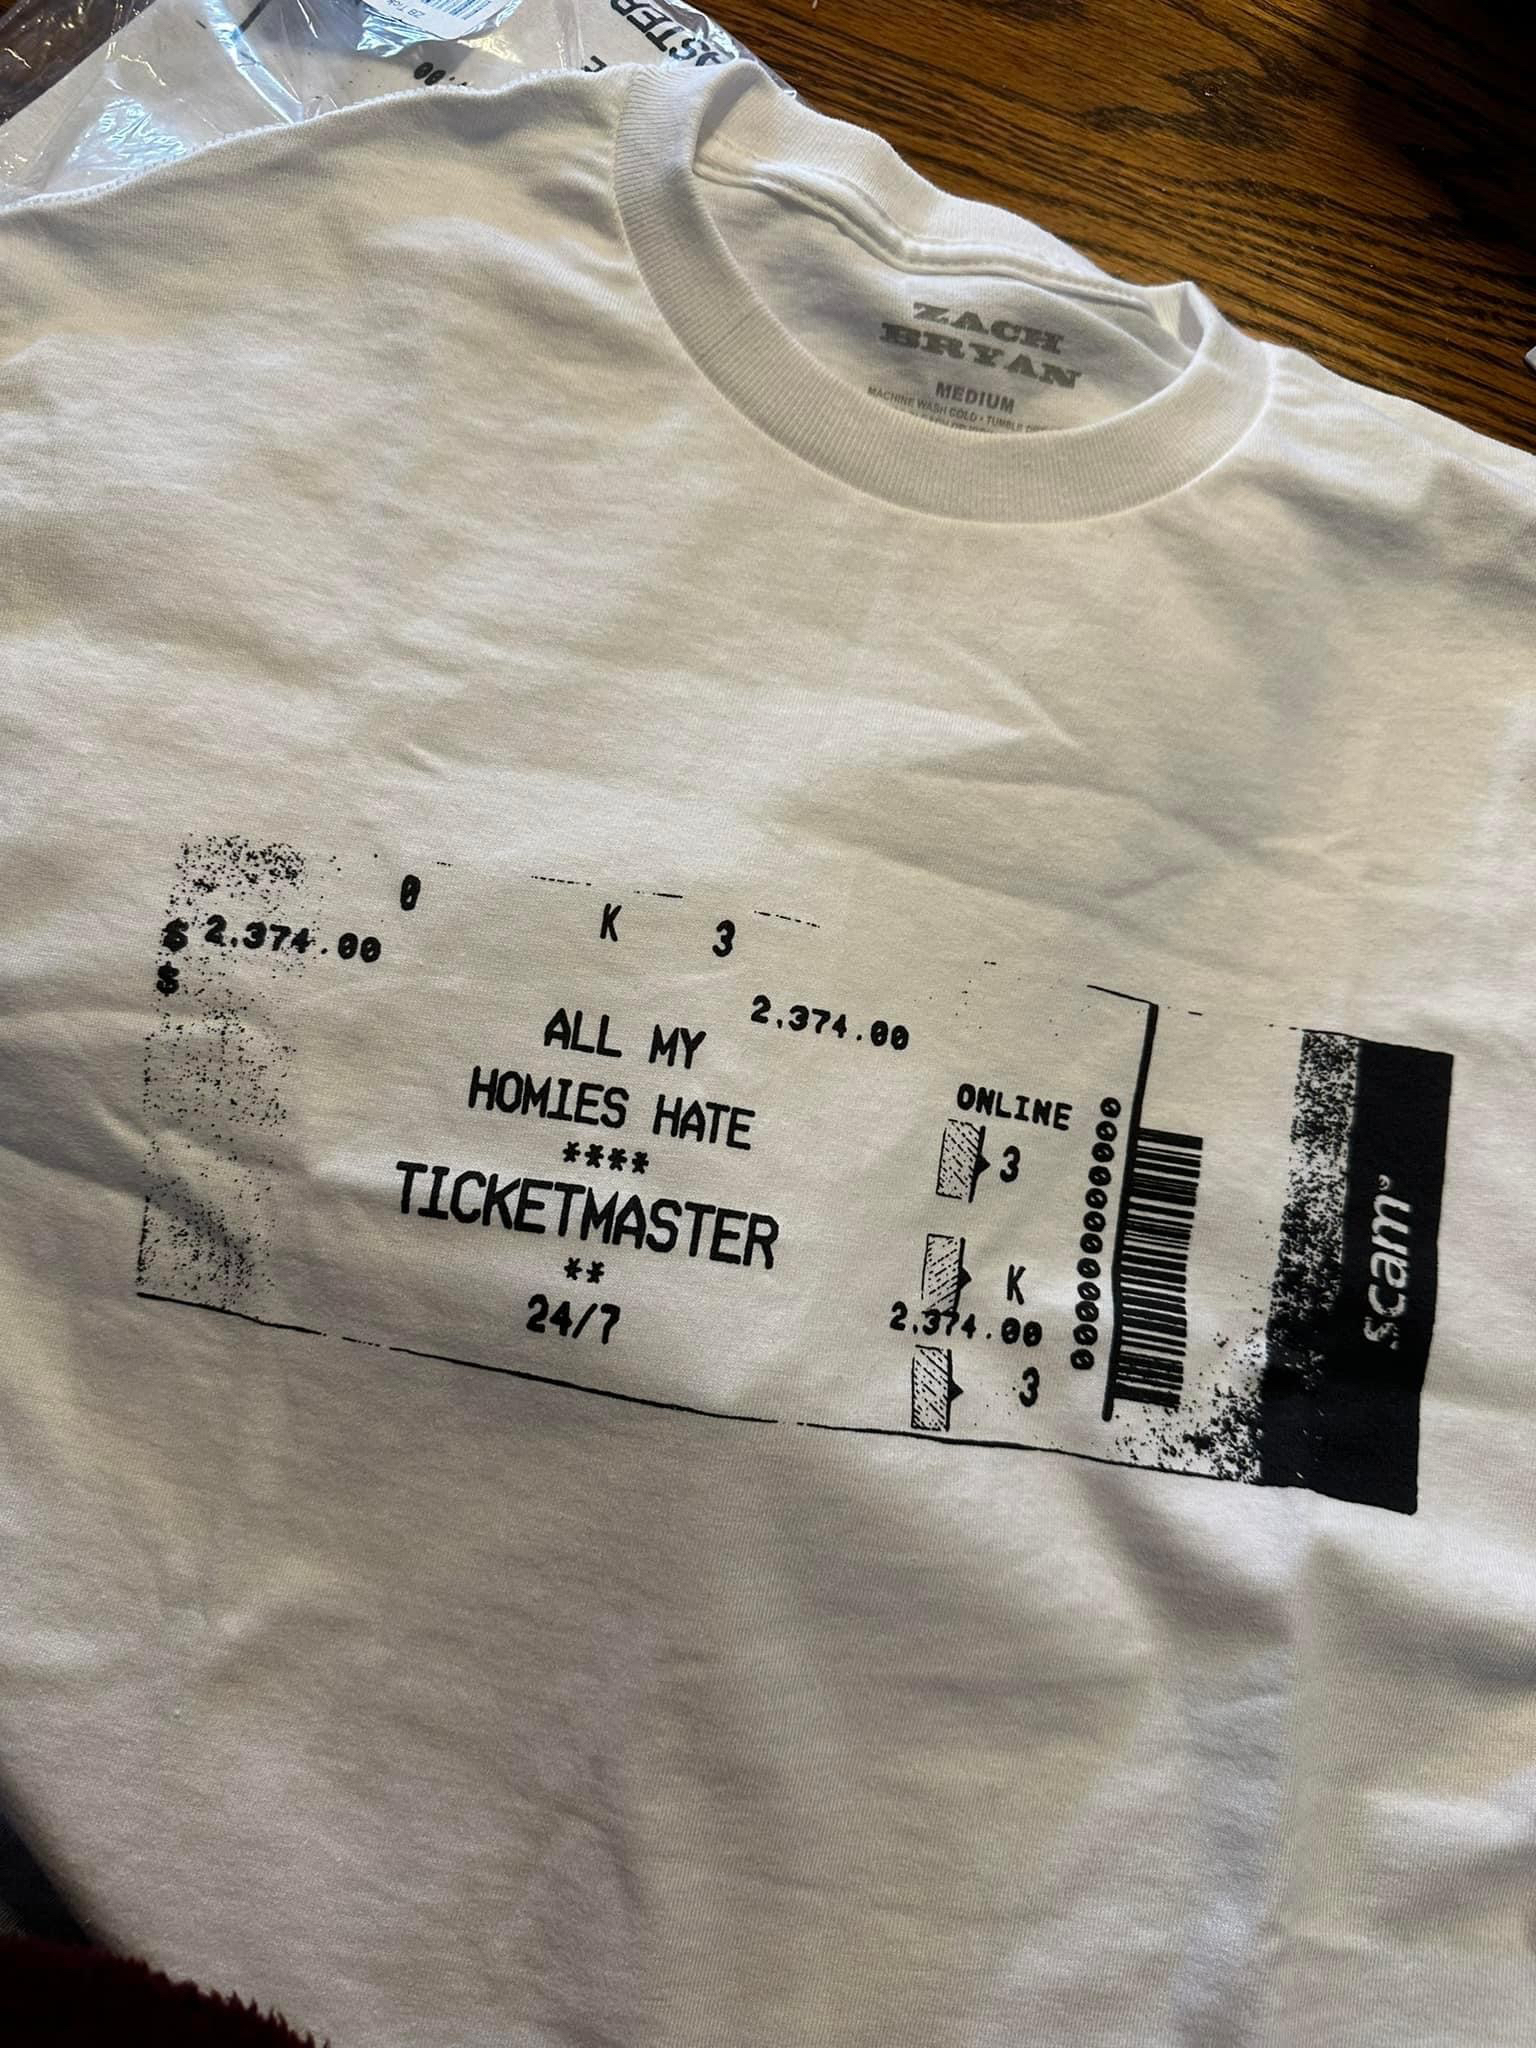 All My Homies Hate Ticketmaster 24/7 Zach Bryan Shirt Limited Edition